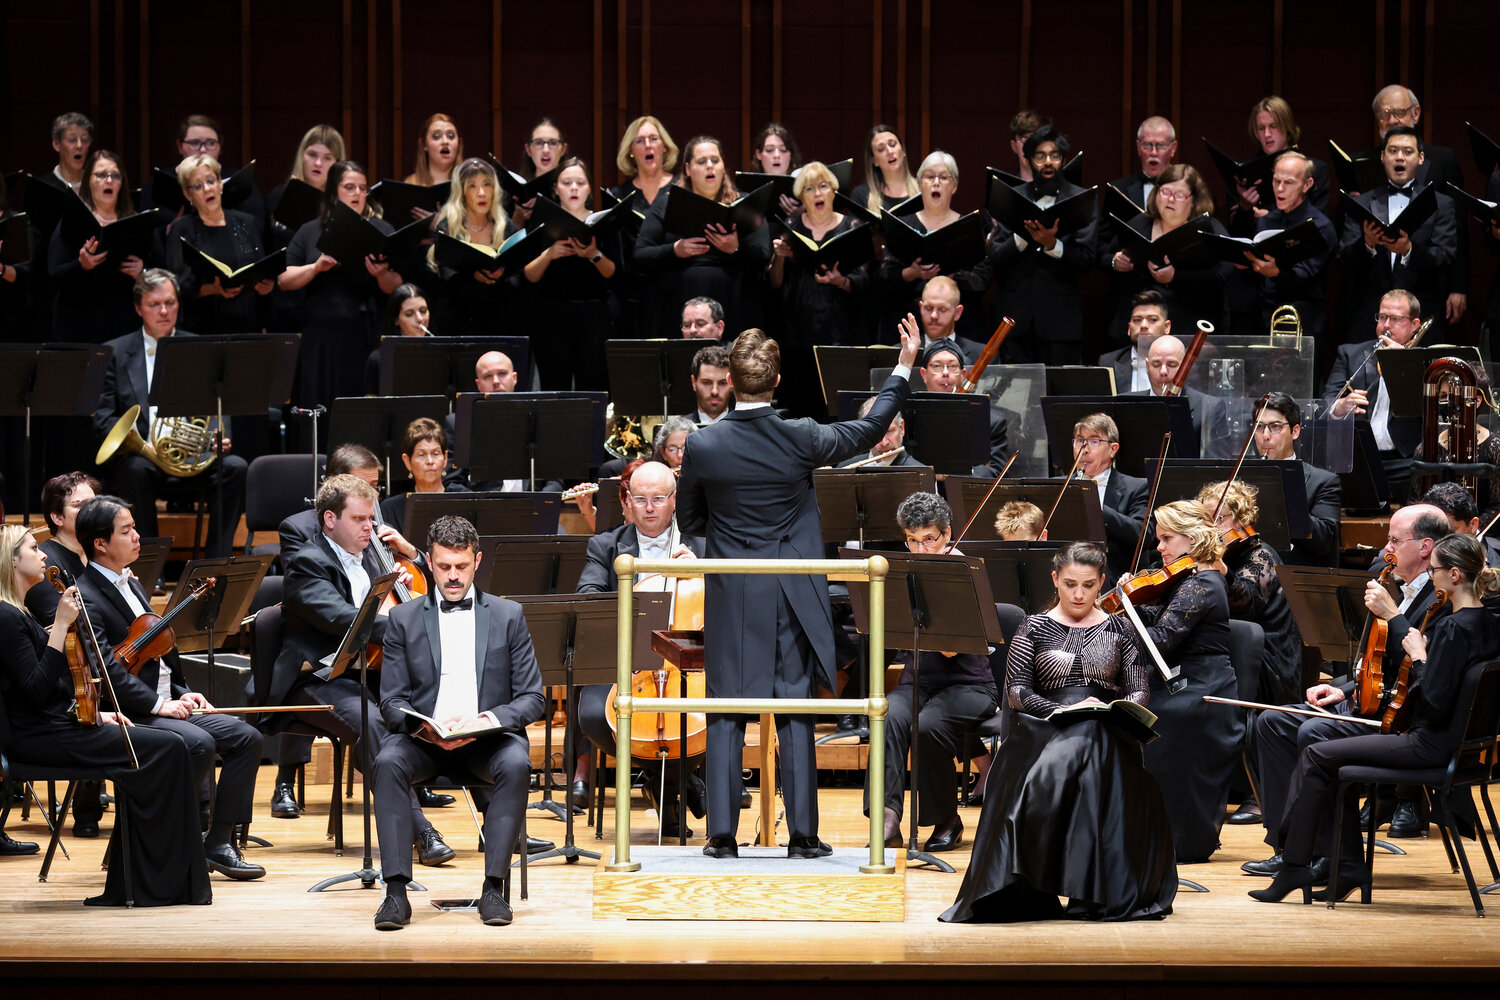 Handel’s Messiah performed by the Jacksonville Symphony Orchestra and Chorus.